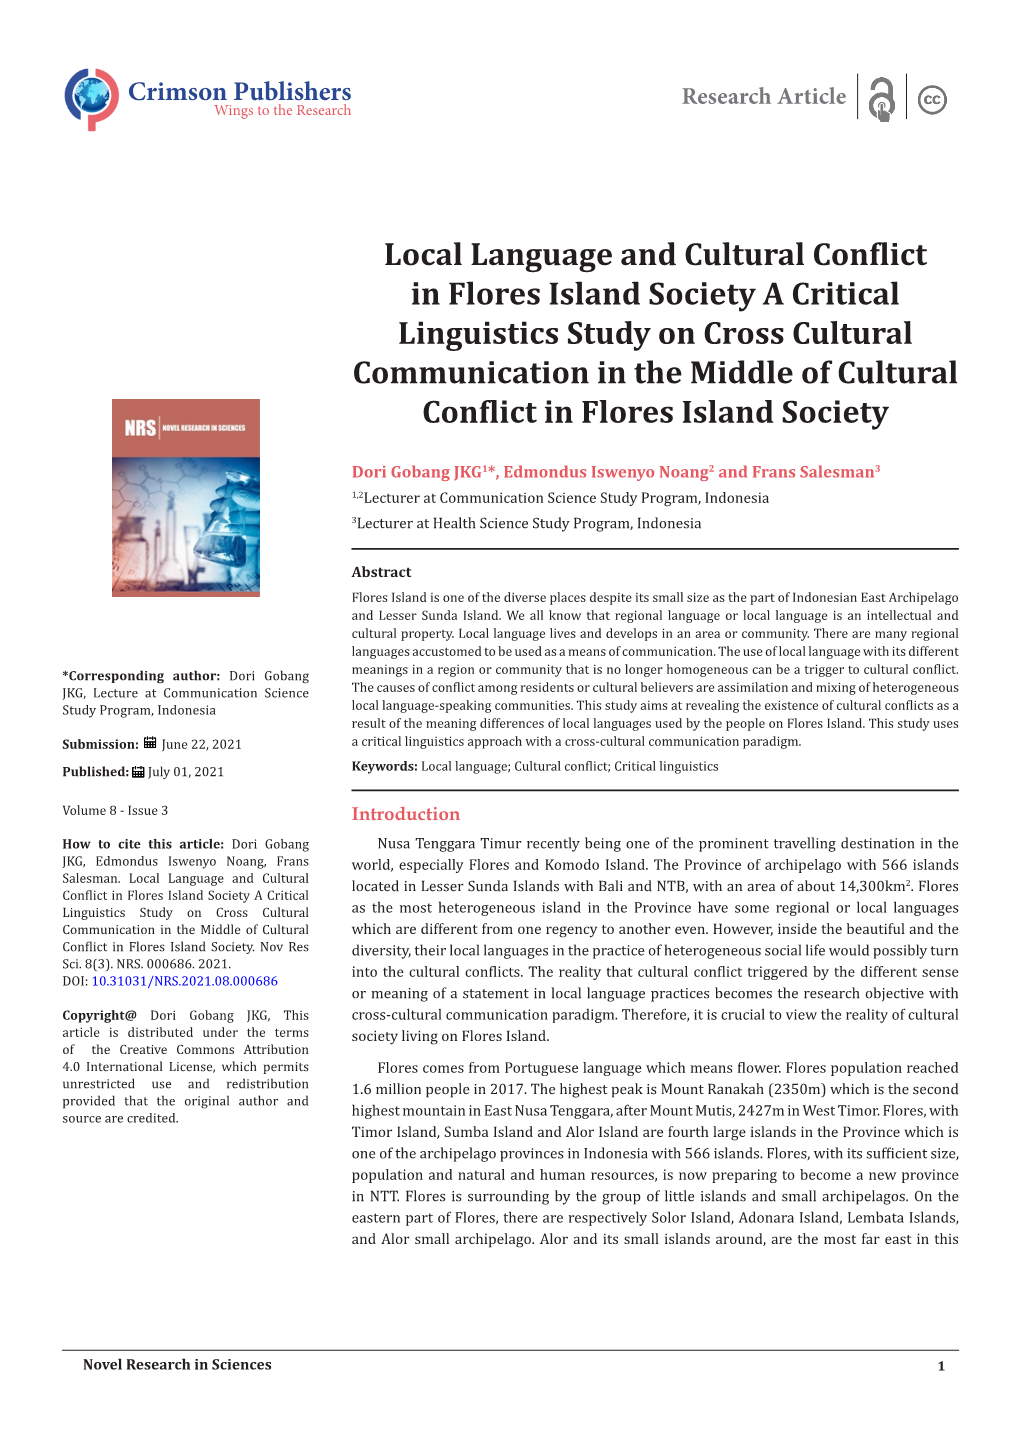 Local Language and Cultural Conflict in Flores Island Society a Critical